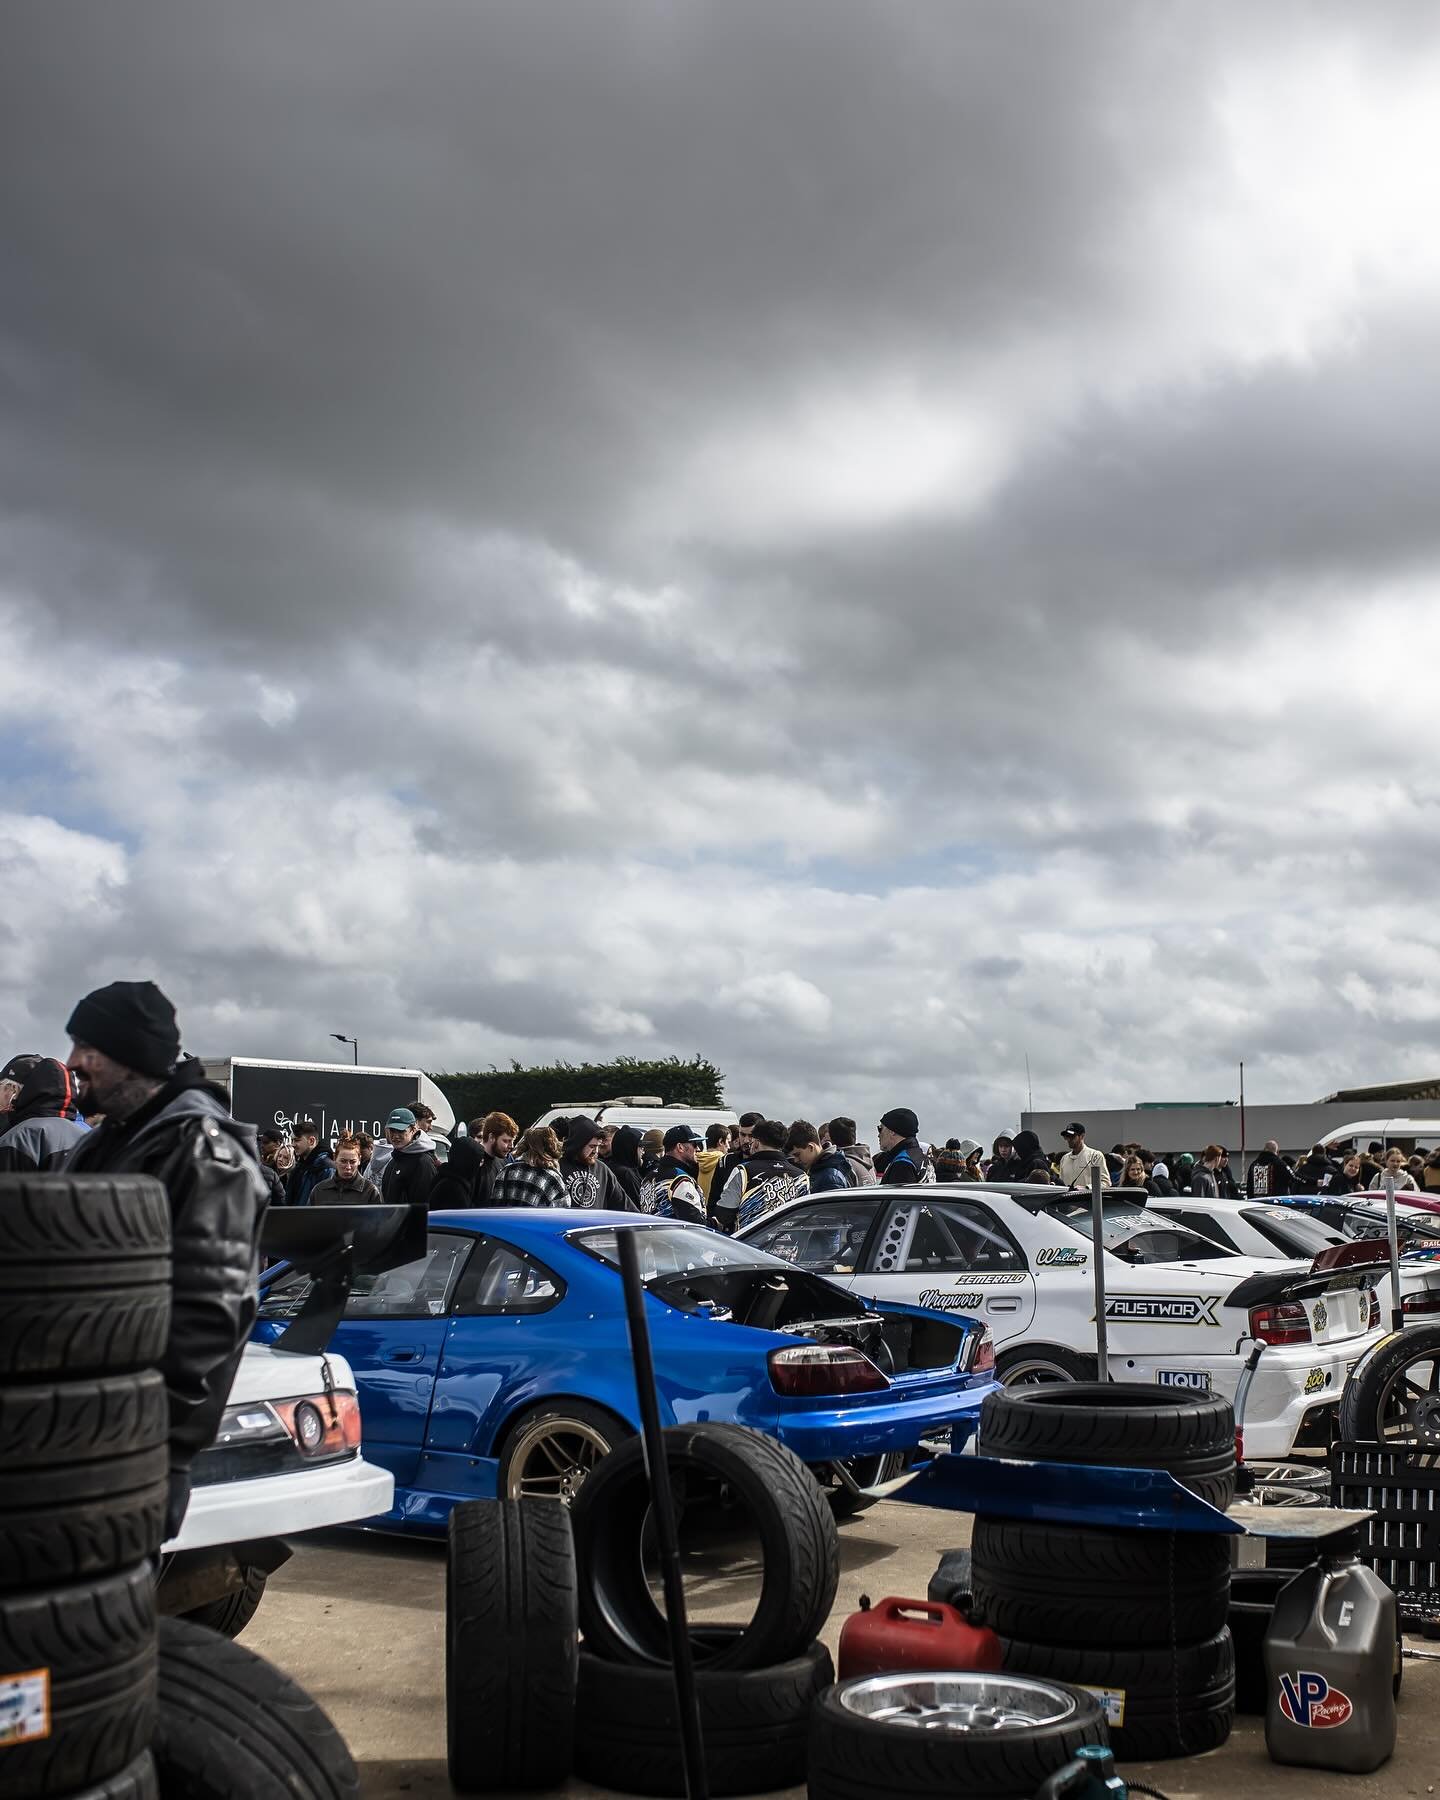 Always a great turn out for Japfest, with some of the best drivers/cars in the UK coming out for the demos. 

@japfest_official 

#drift #drifting #driftcar #driftlife #driftnation #drifter #silverstone #japfest